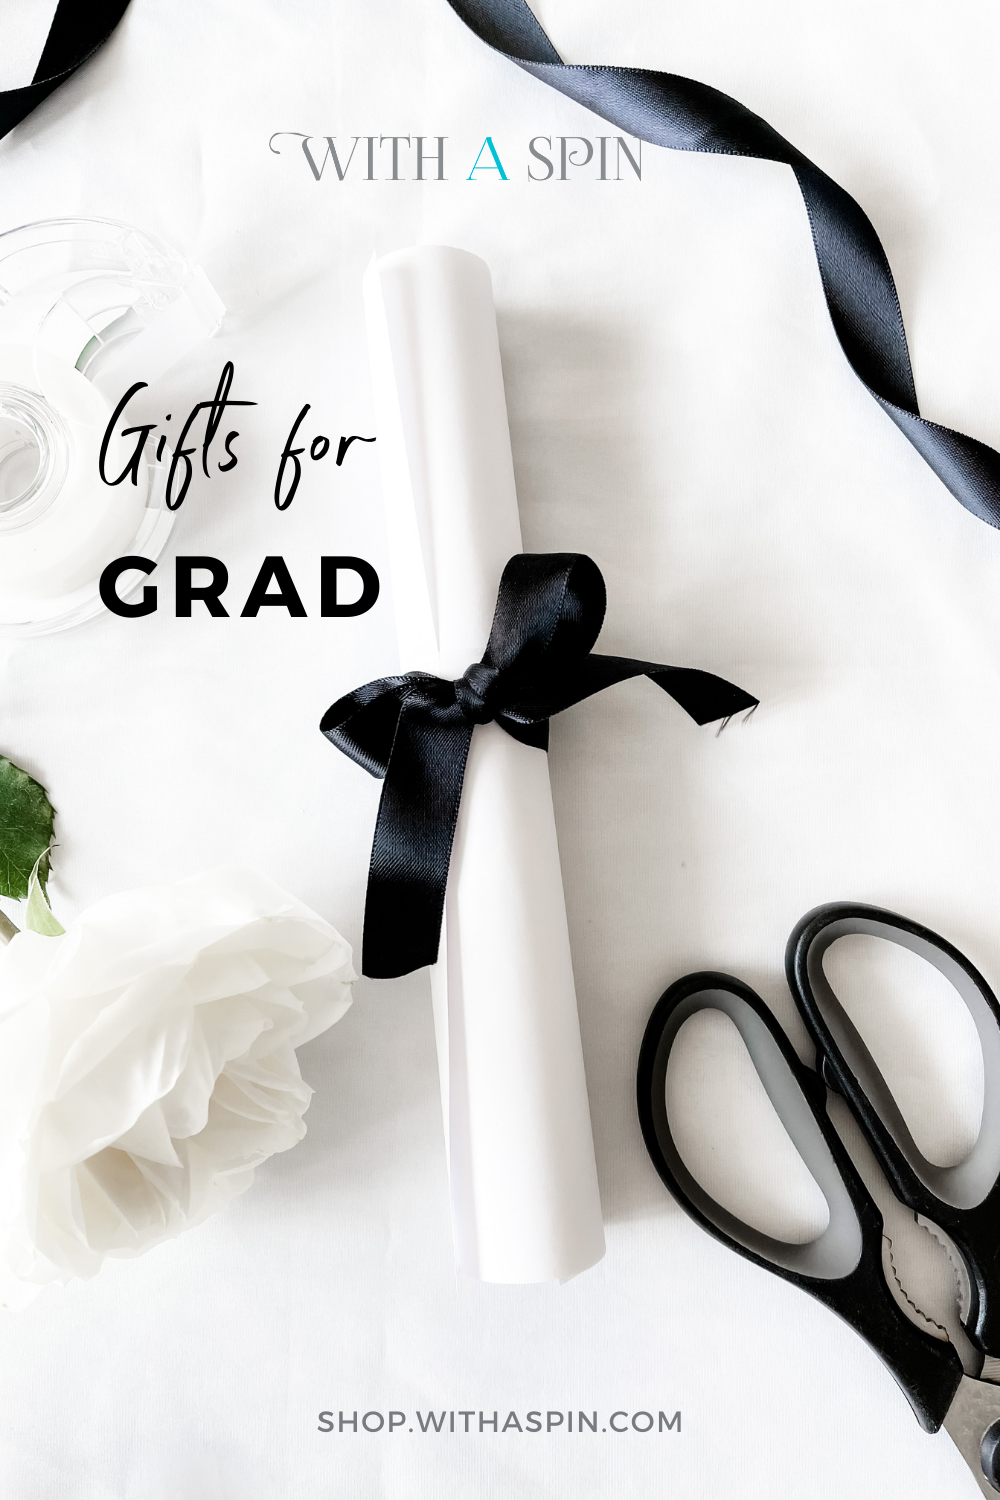 Best Gifts for grad - Islamic gifts - WithASpin